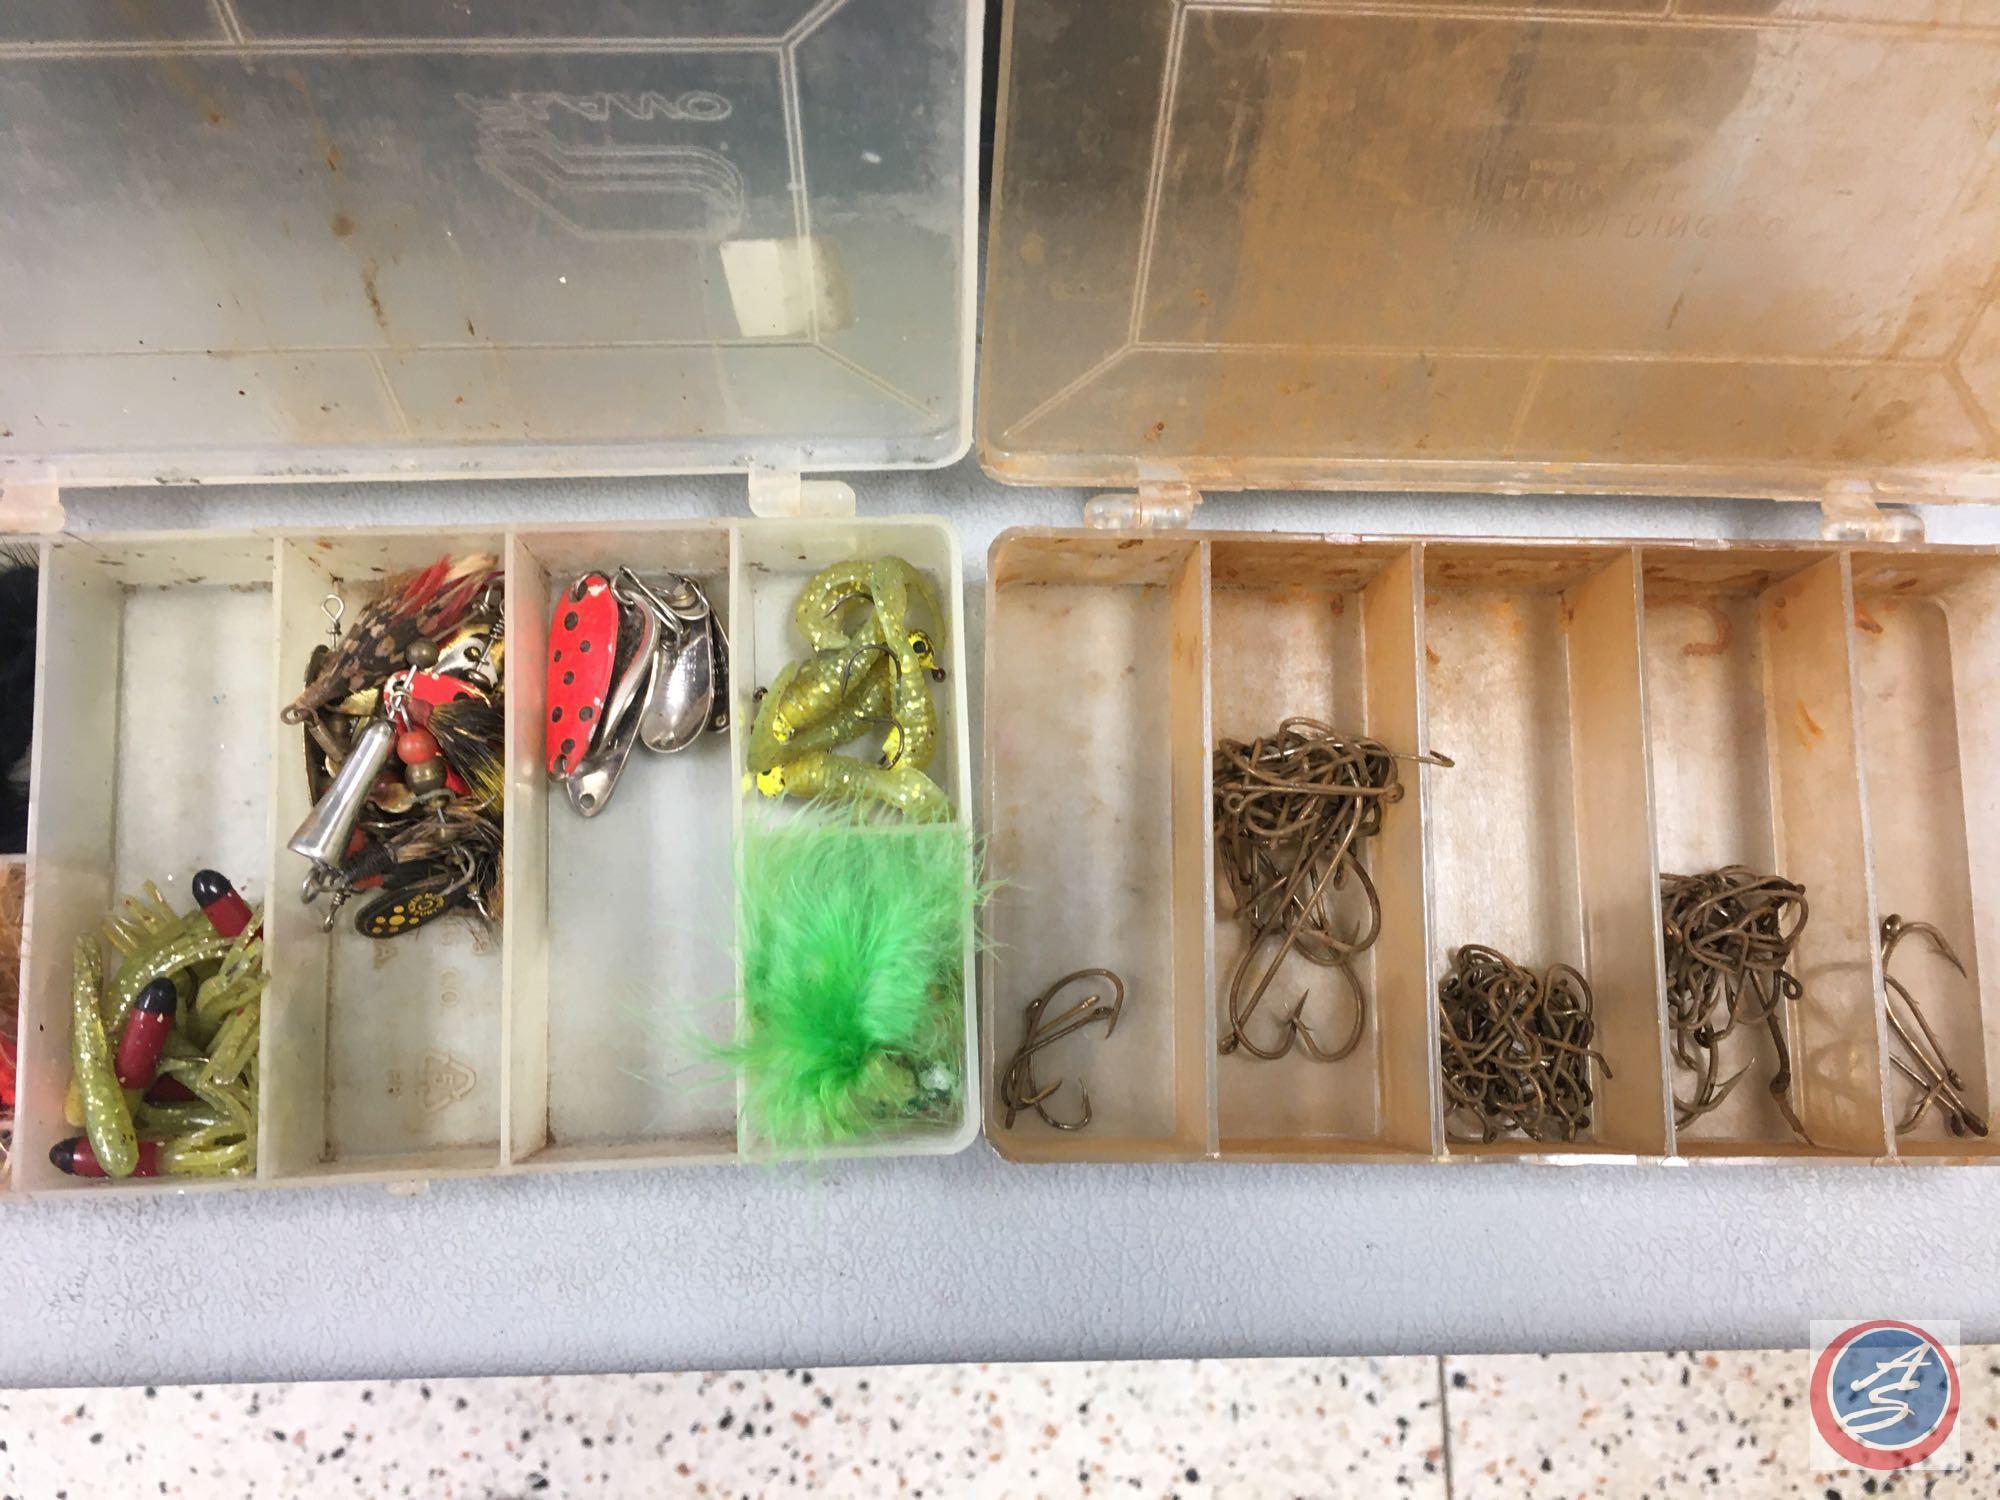 Plano plastic over and under storage trays w/contents included - Lures of the various types, Hooks,